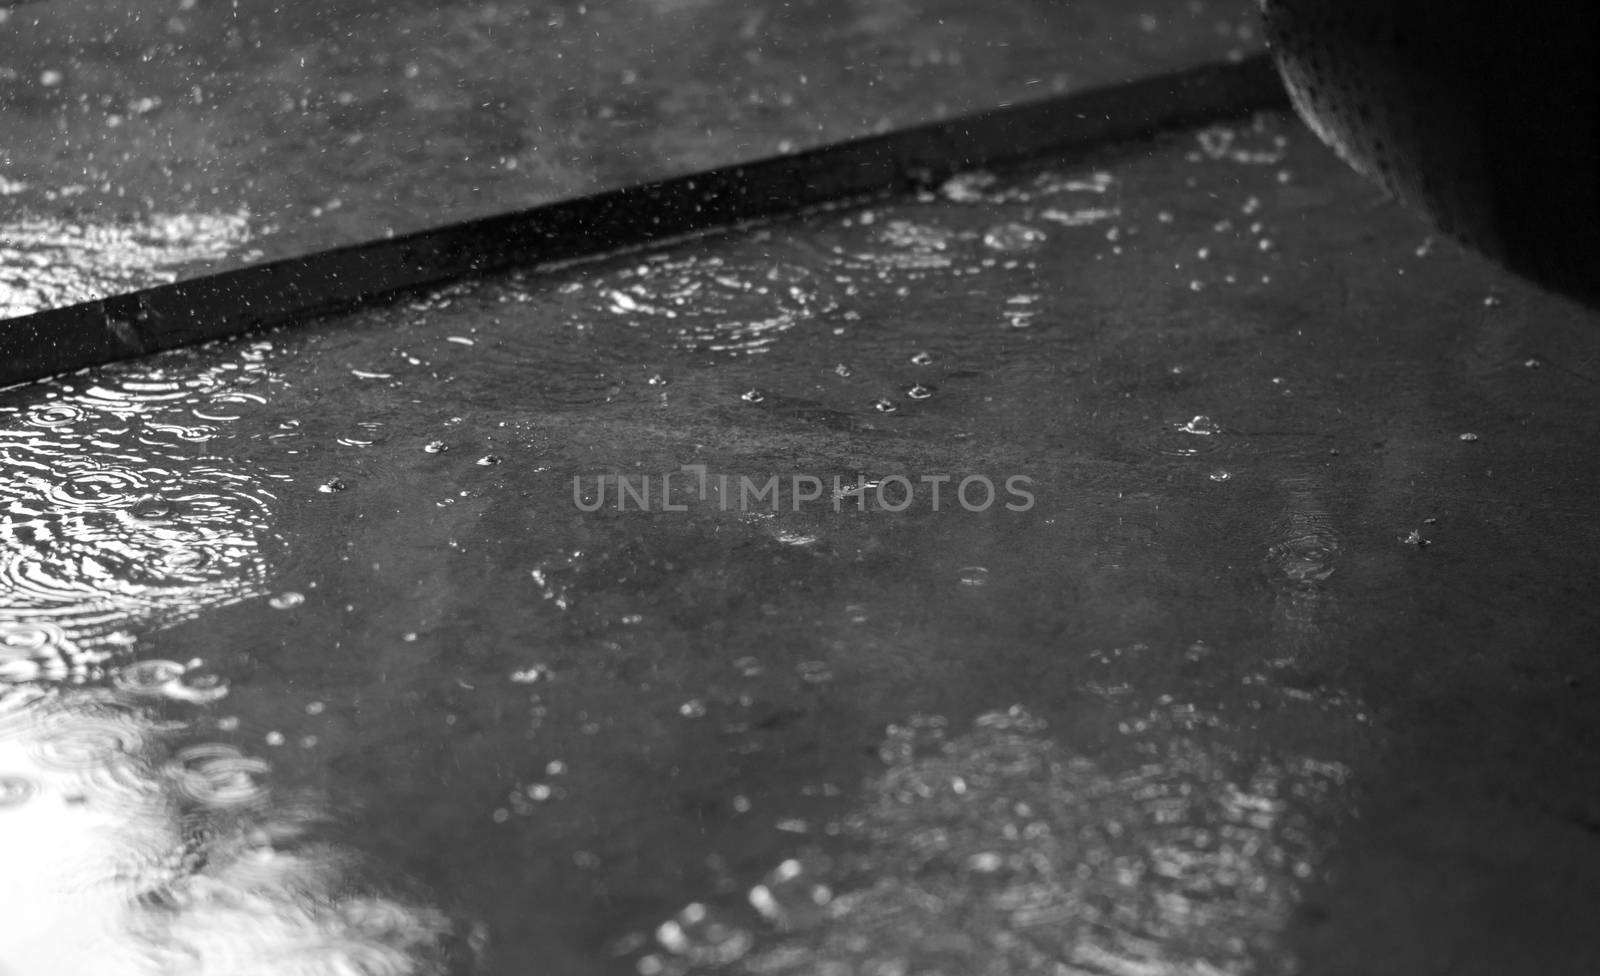 BLACK AND WHITE PHOTO OF RAIN PUDDLES WITH RAINDROPS